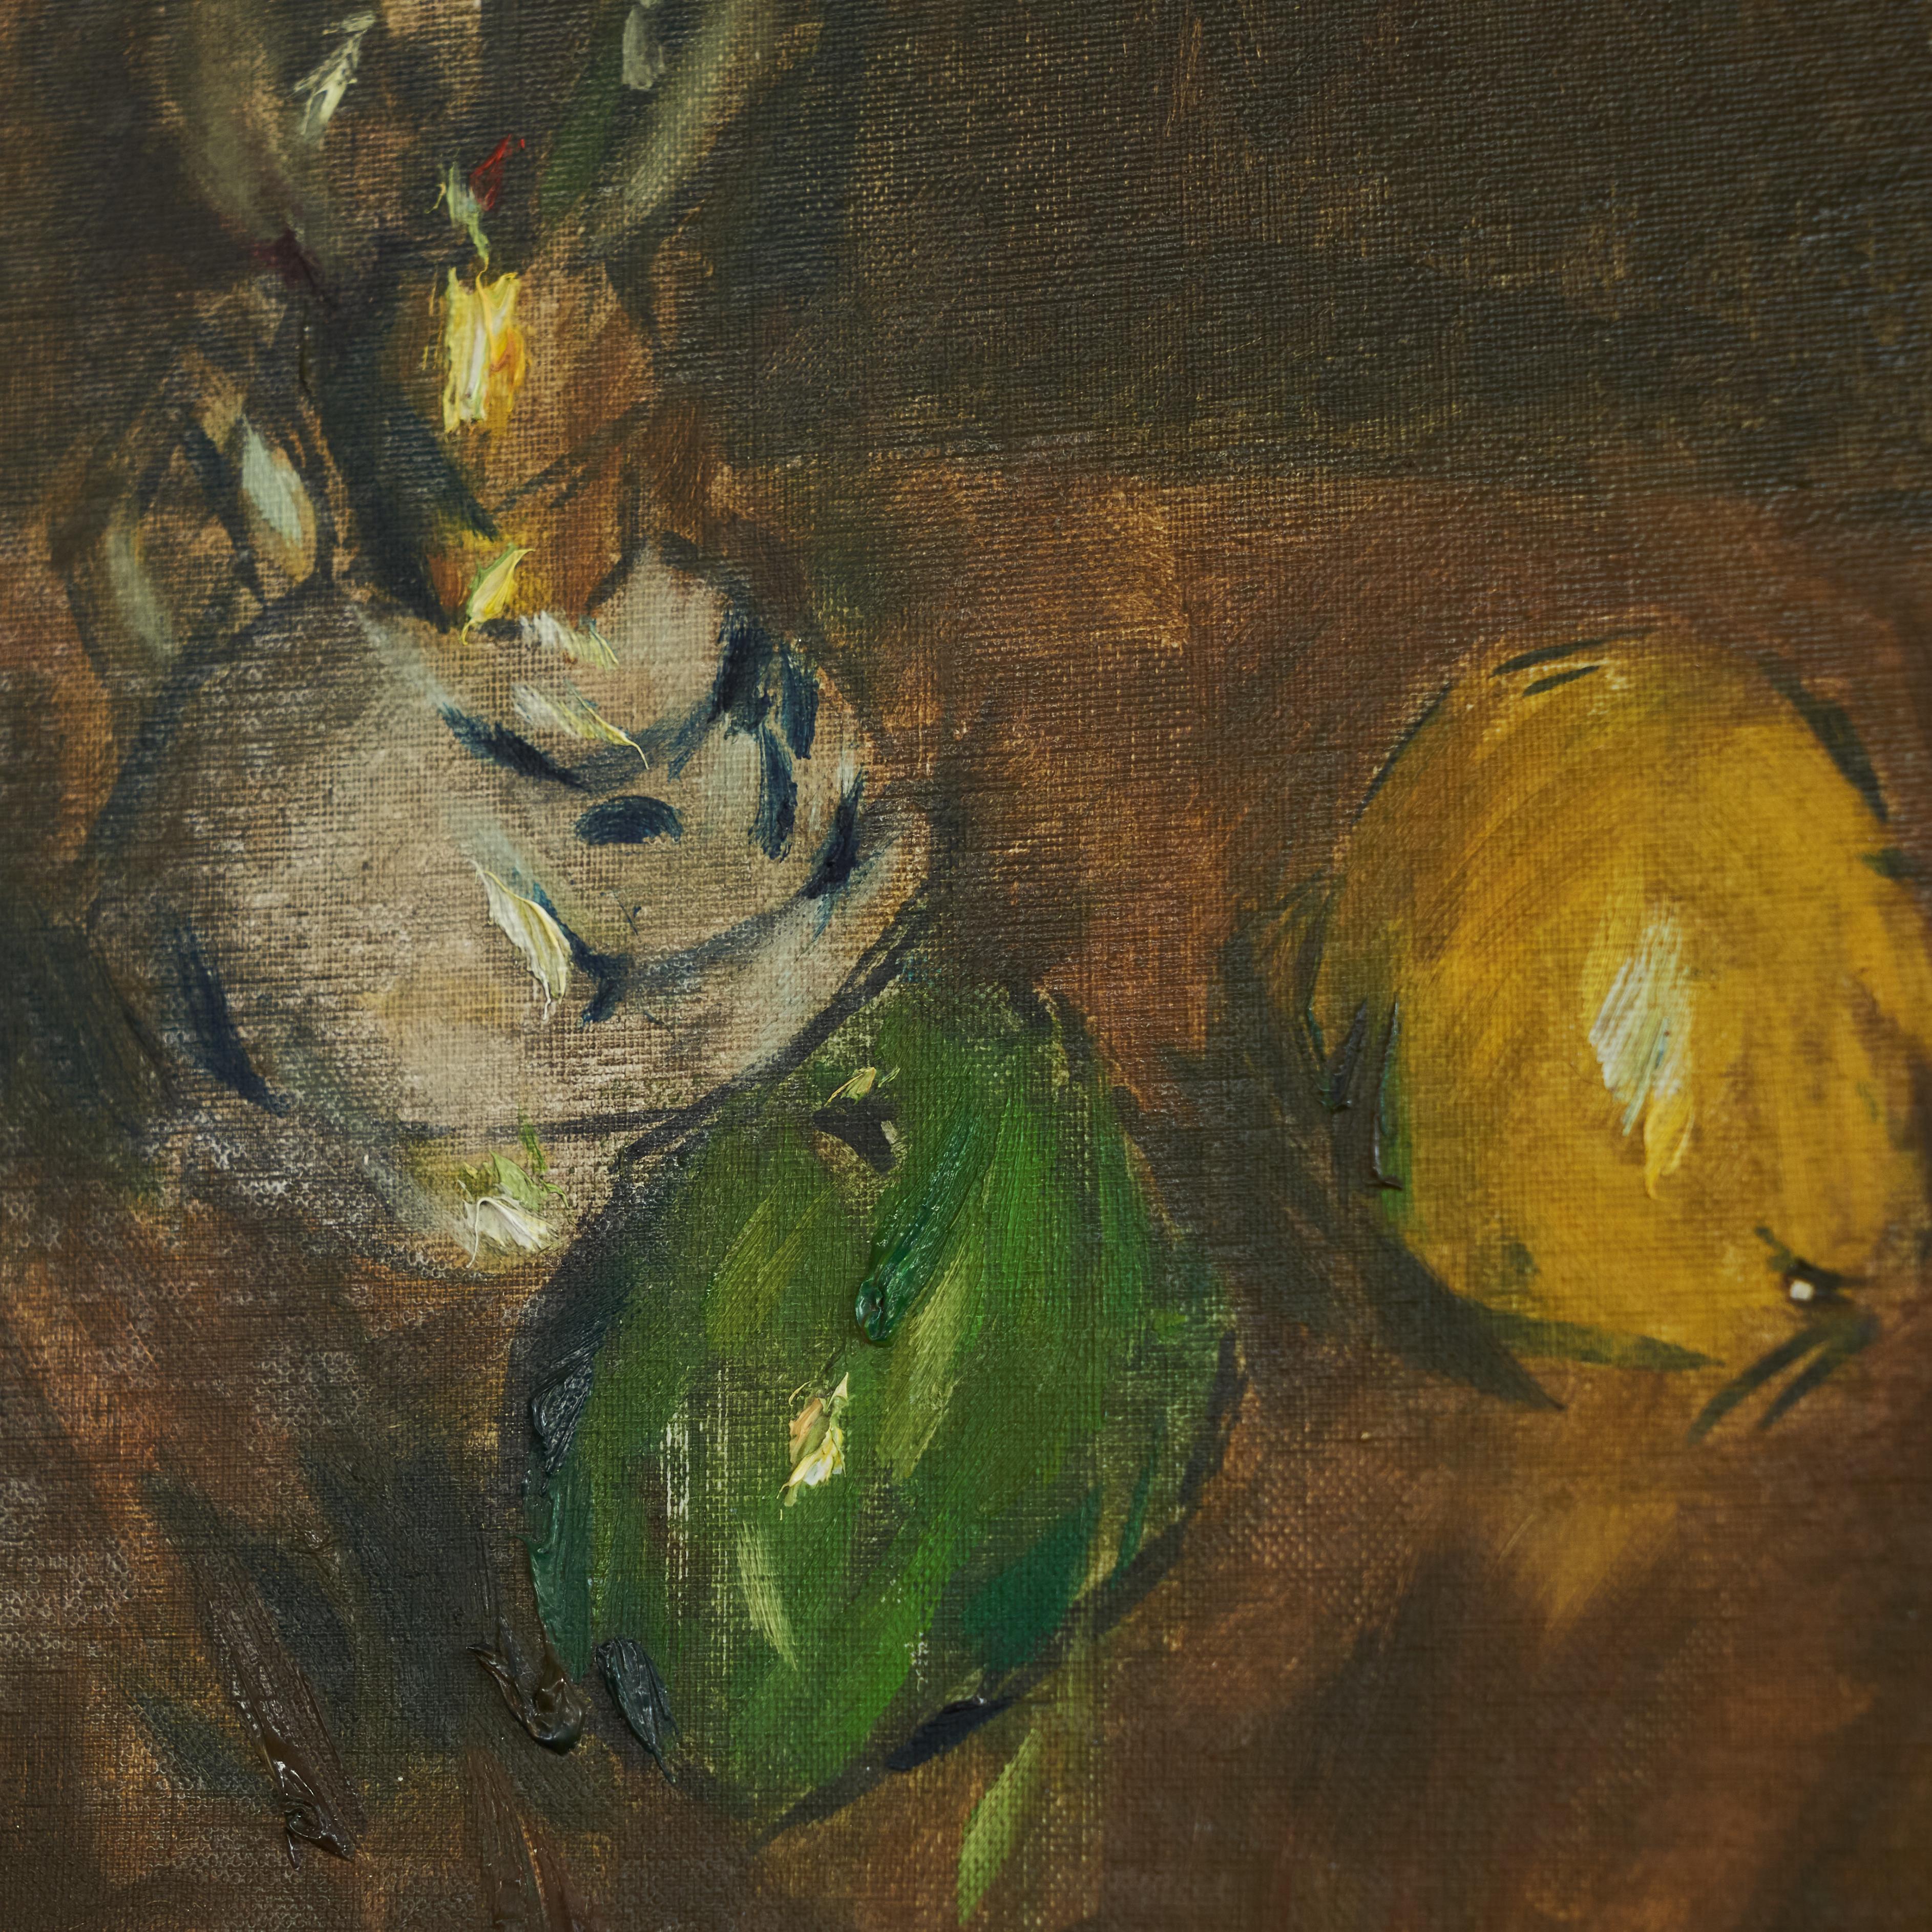 Gustave de Smet 'Still Life with Oil Lamp and Fruit' Oil on Board 1930s In Good Condition For Sale In Tilburg, NL